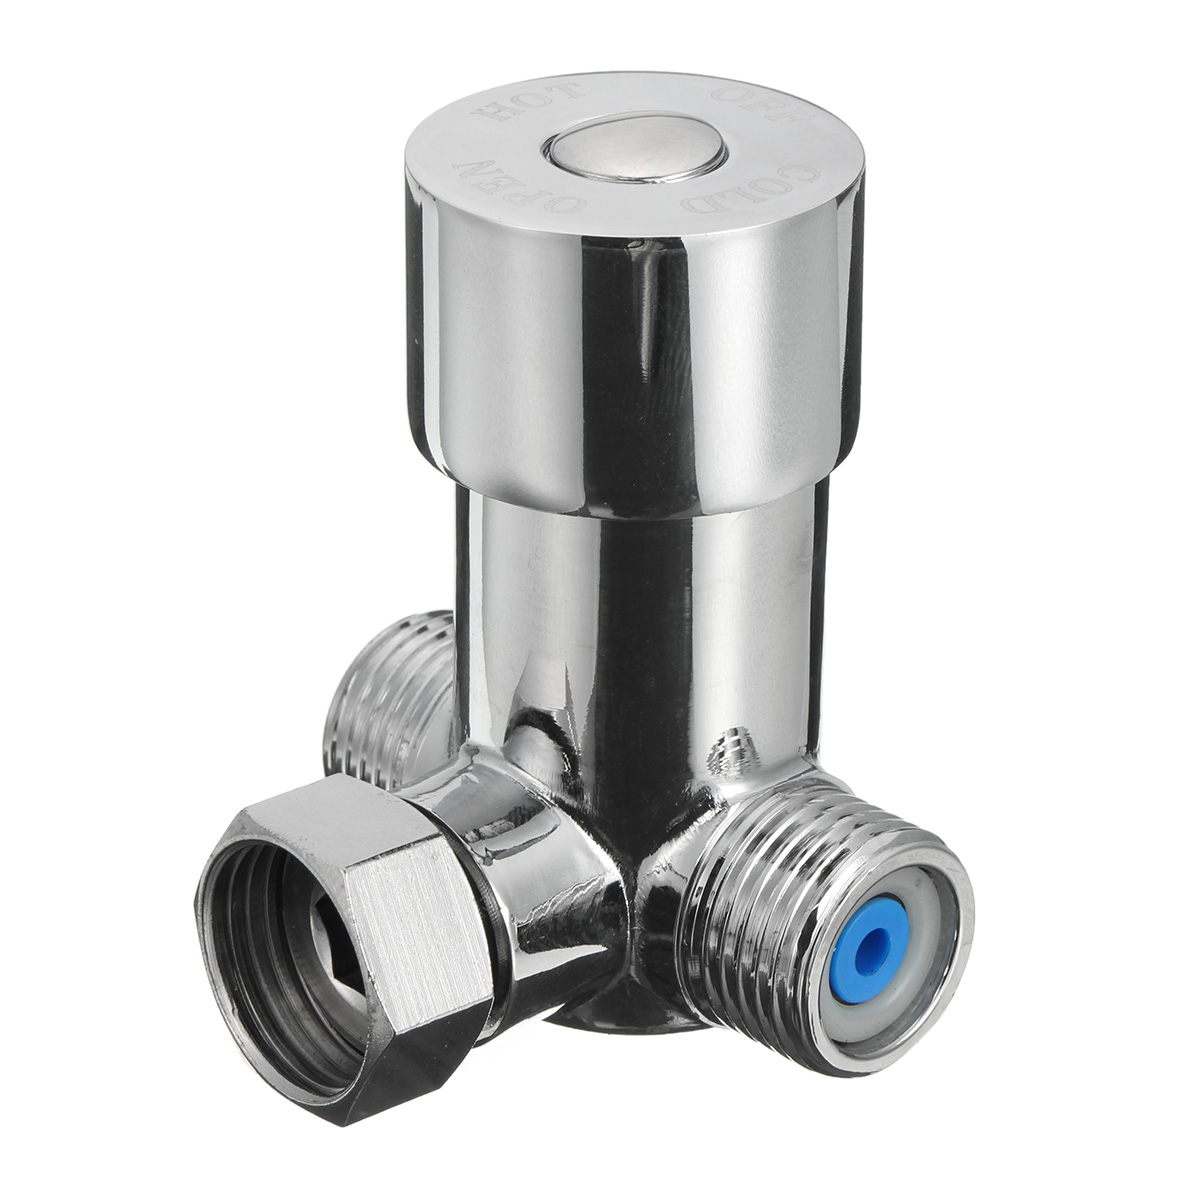 Hot Cold Water Mixing Valve For Sensor Faucet Thermostatic Temperature ...